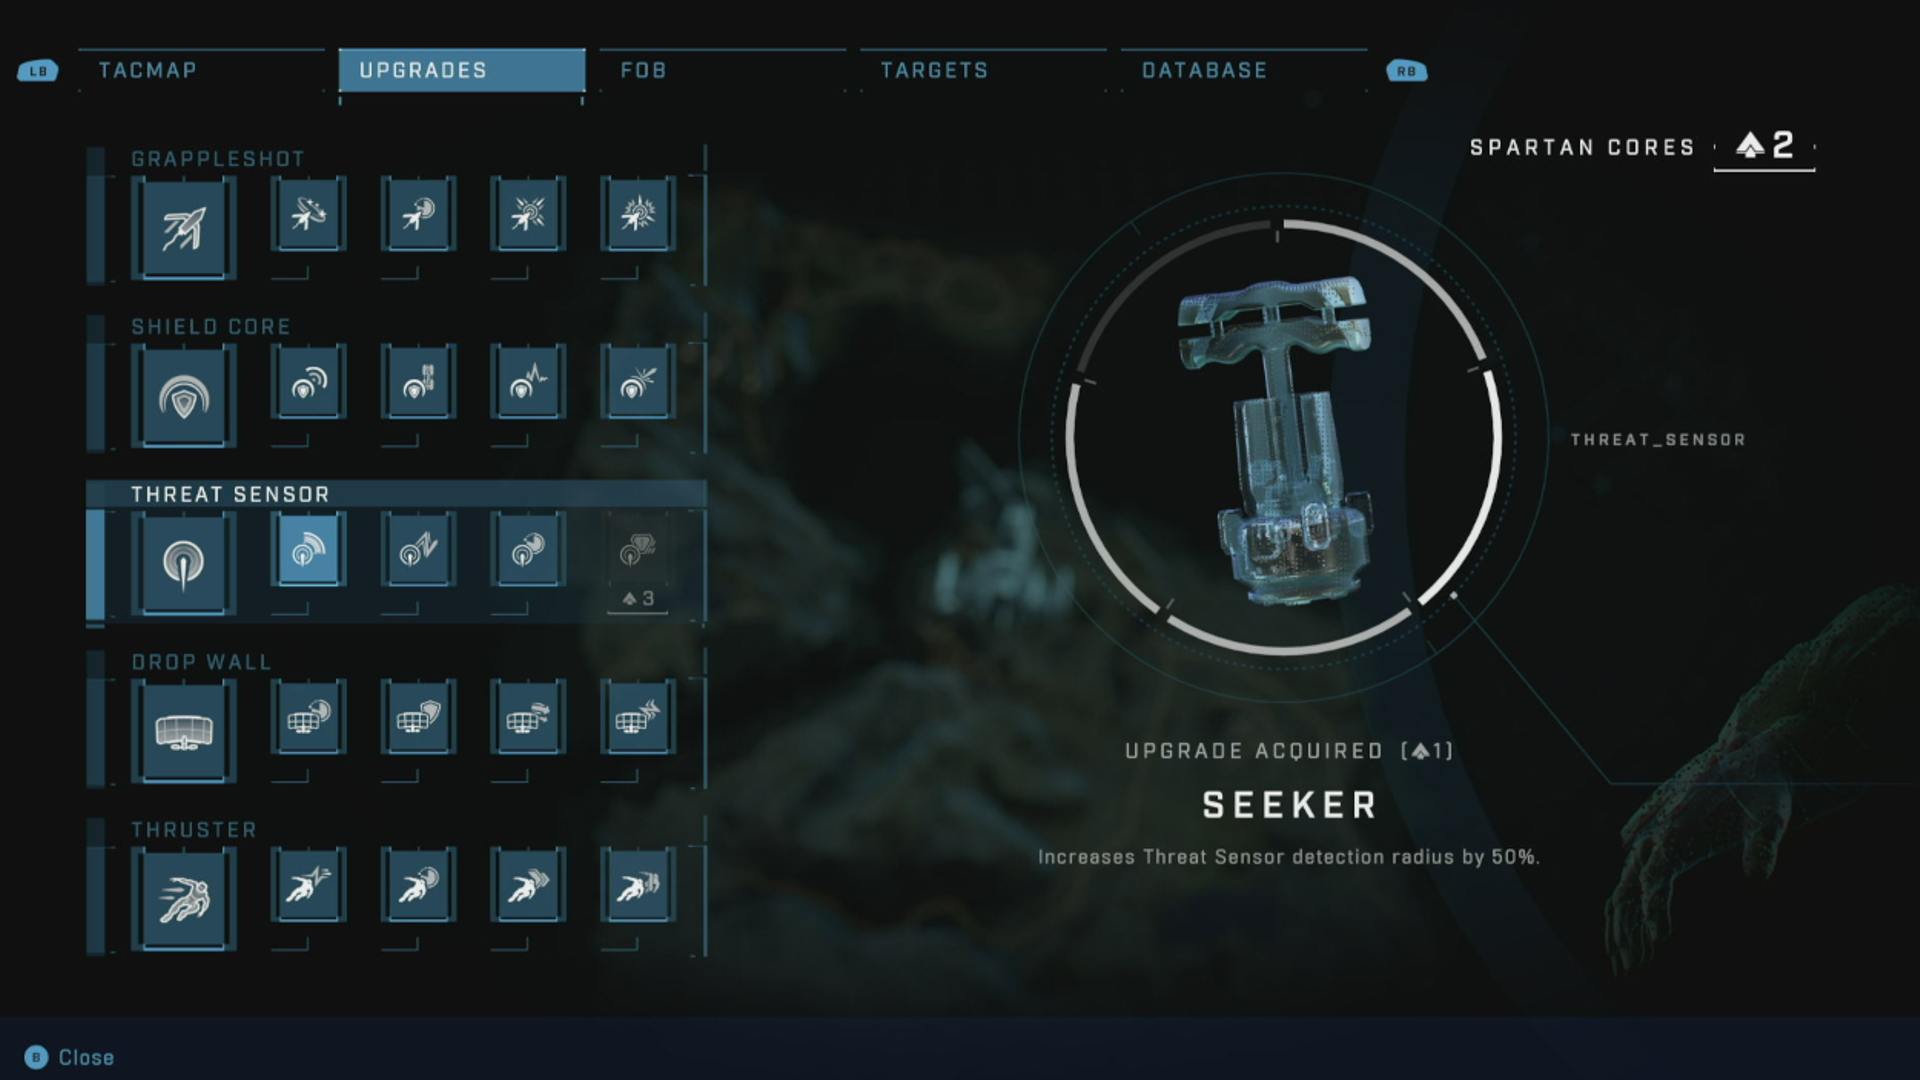 Best Halo Infinite upgrades: The menu showing the Seeker upgrade.